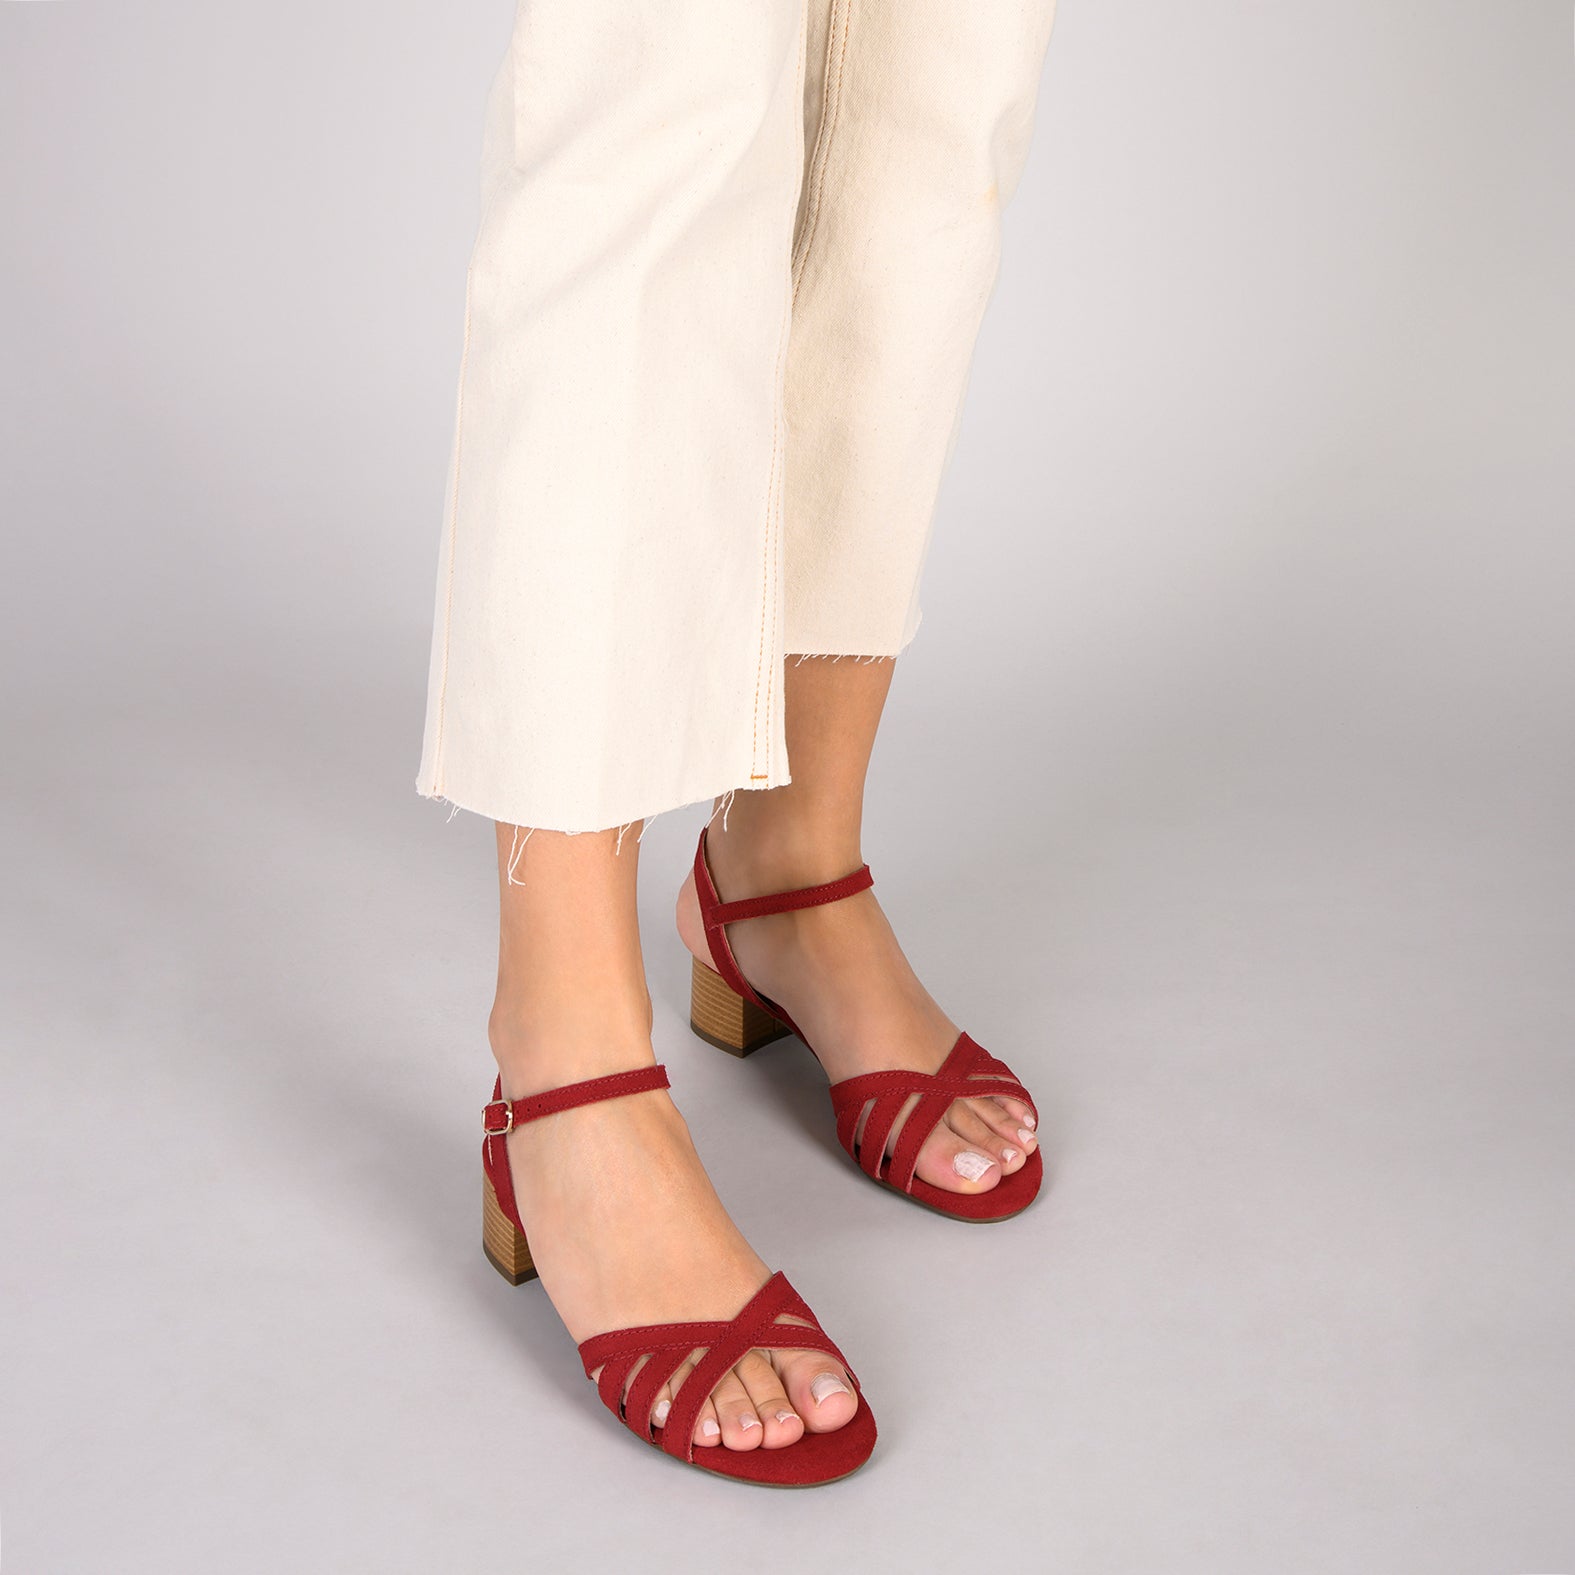 GRACE – RED Women Casual Sandals